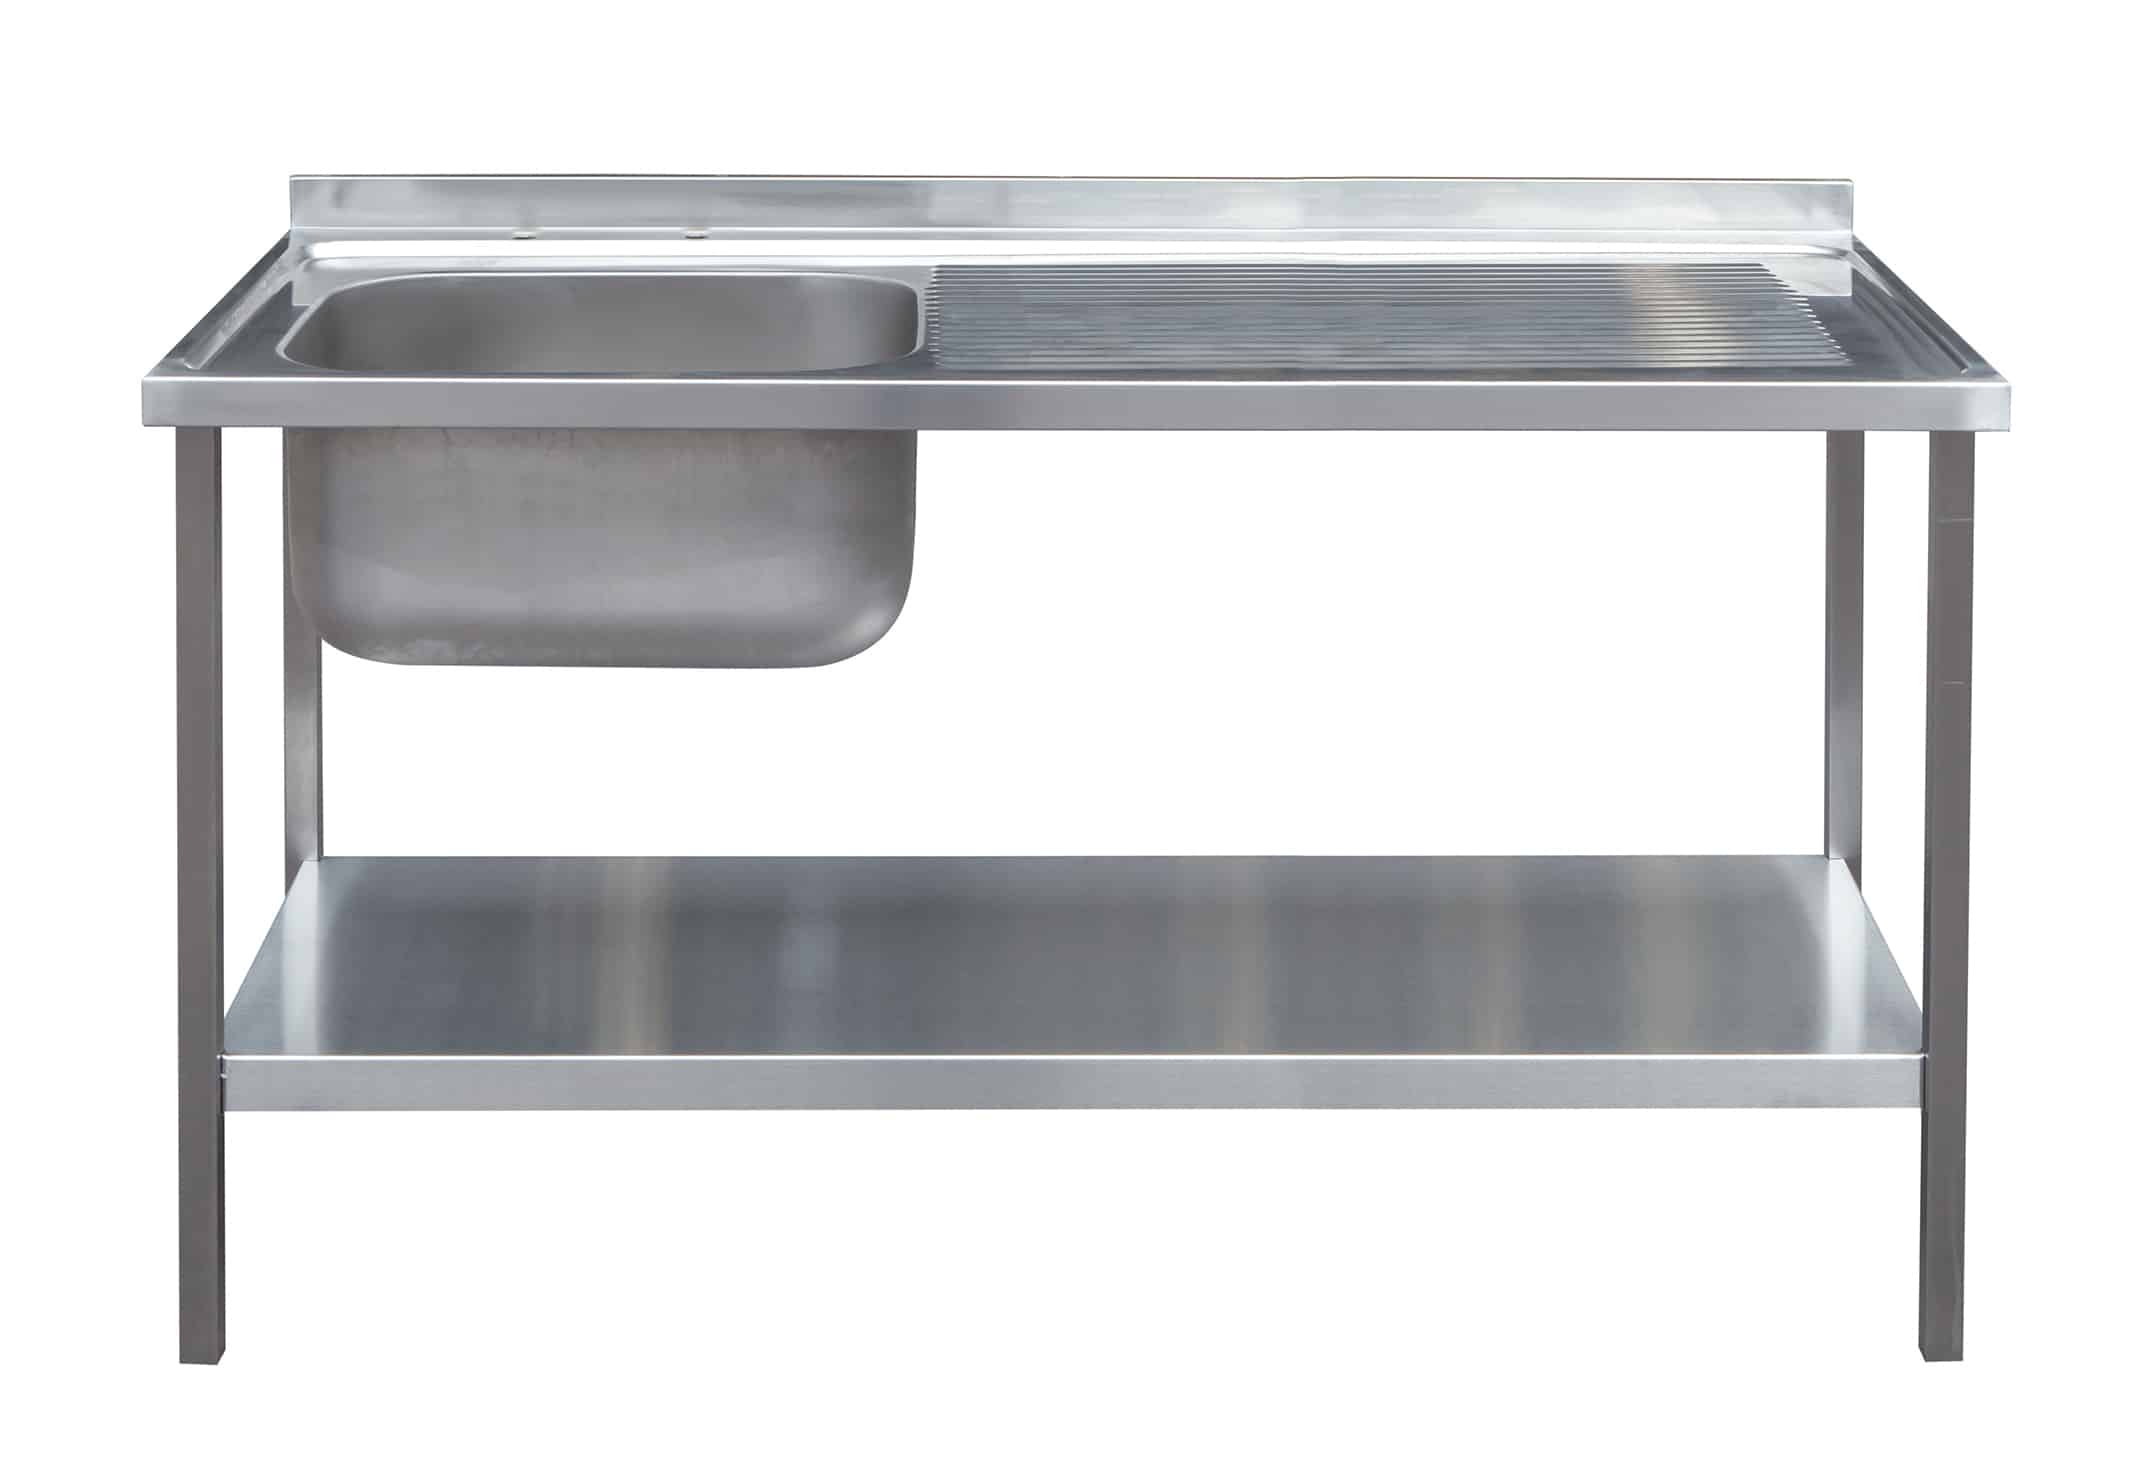 Stainless steel single bowl sink with drainer and under shelf